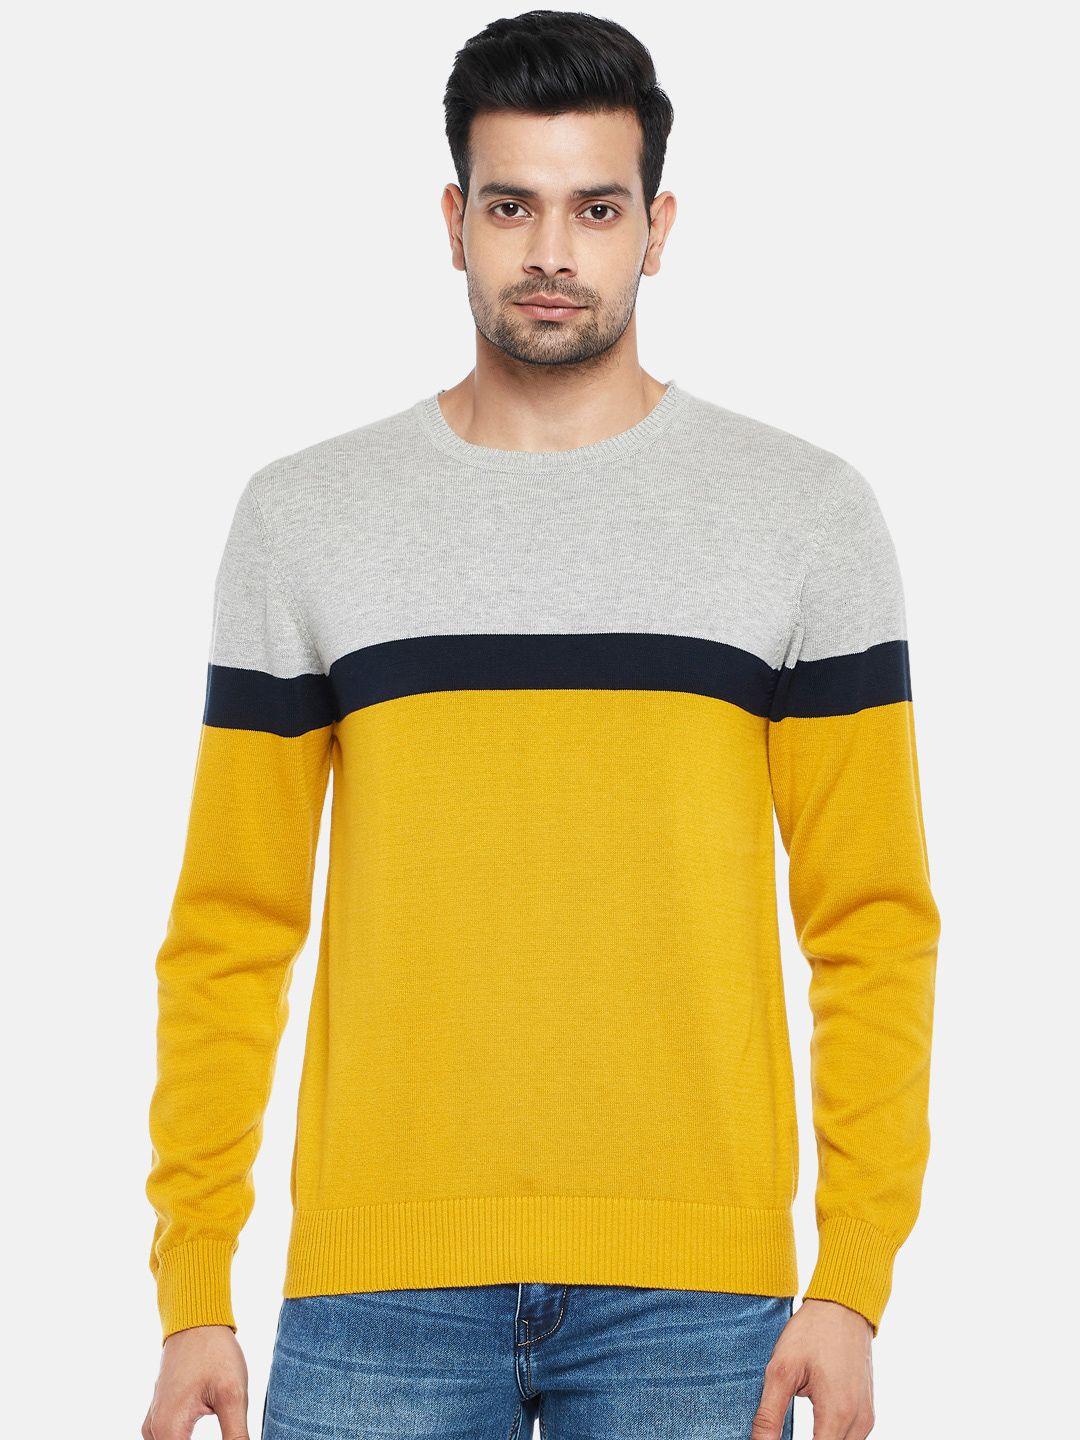 byford-by-pantaloons-men-yellow-&-grey-colourblocked-pure-cotton-pullover